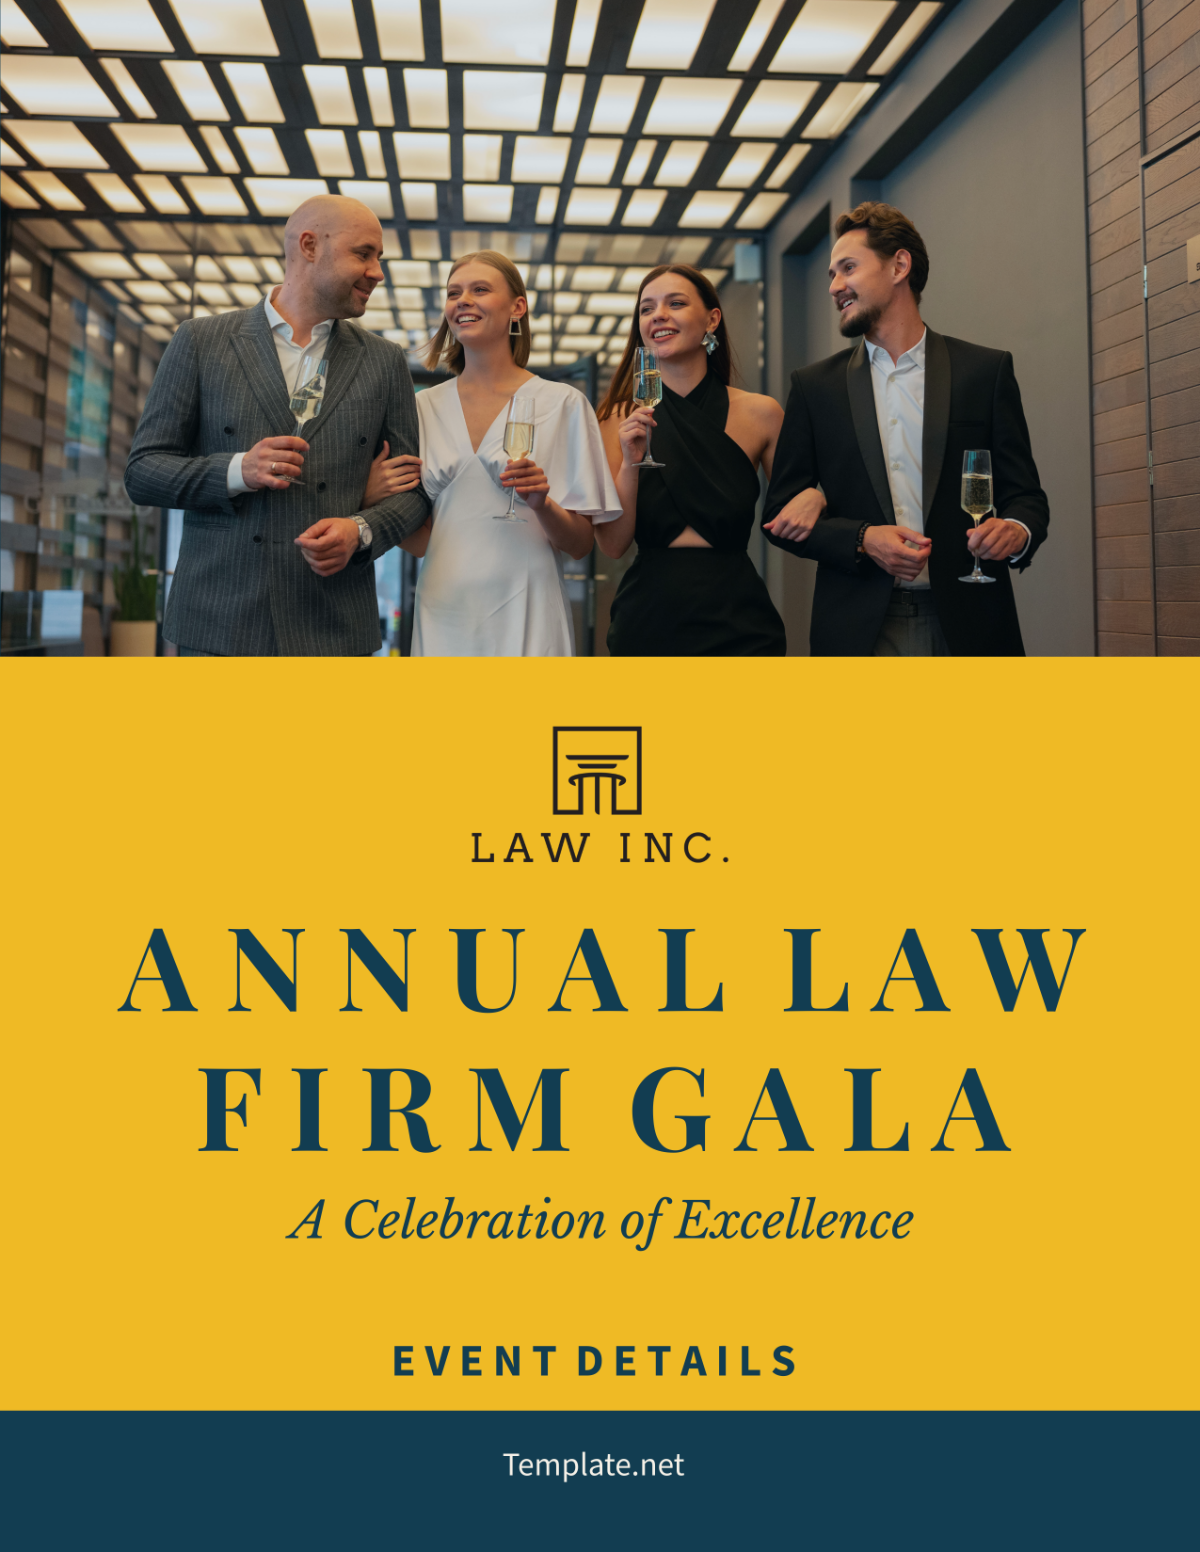 Law Firm Event Flyer Template